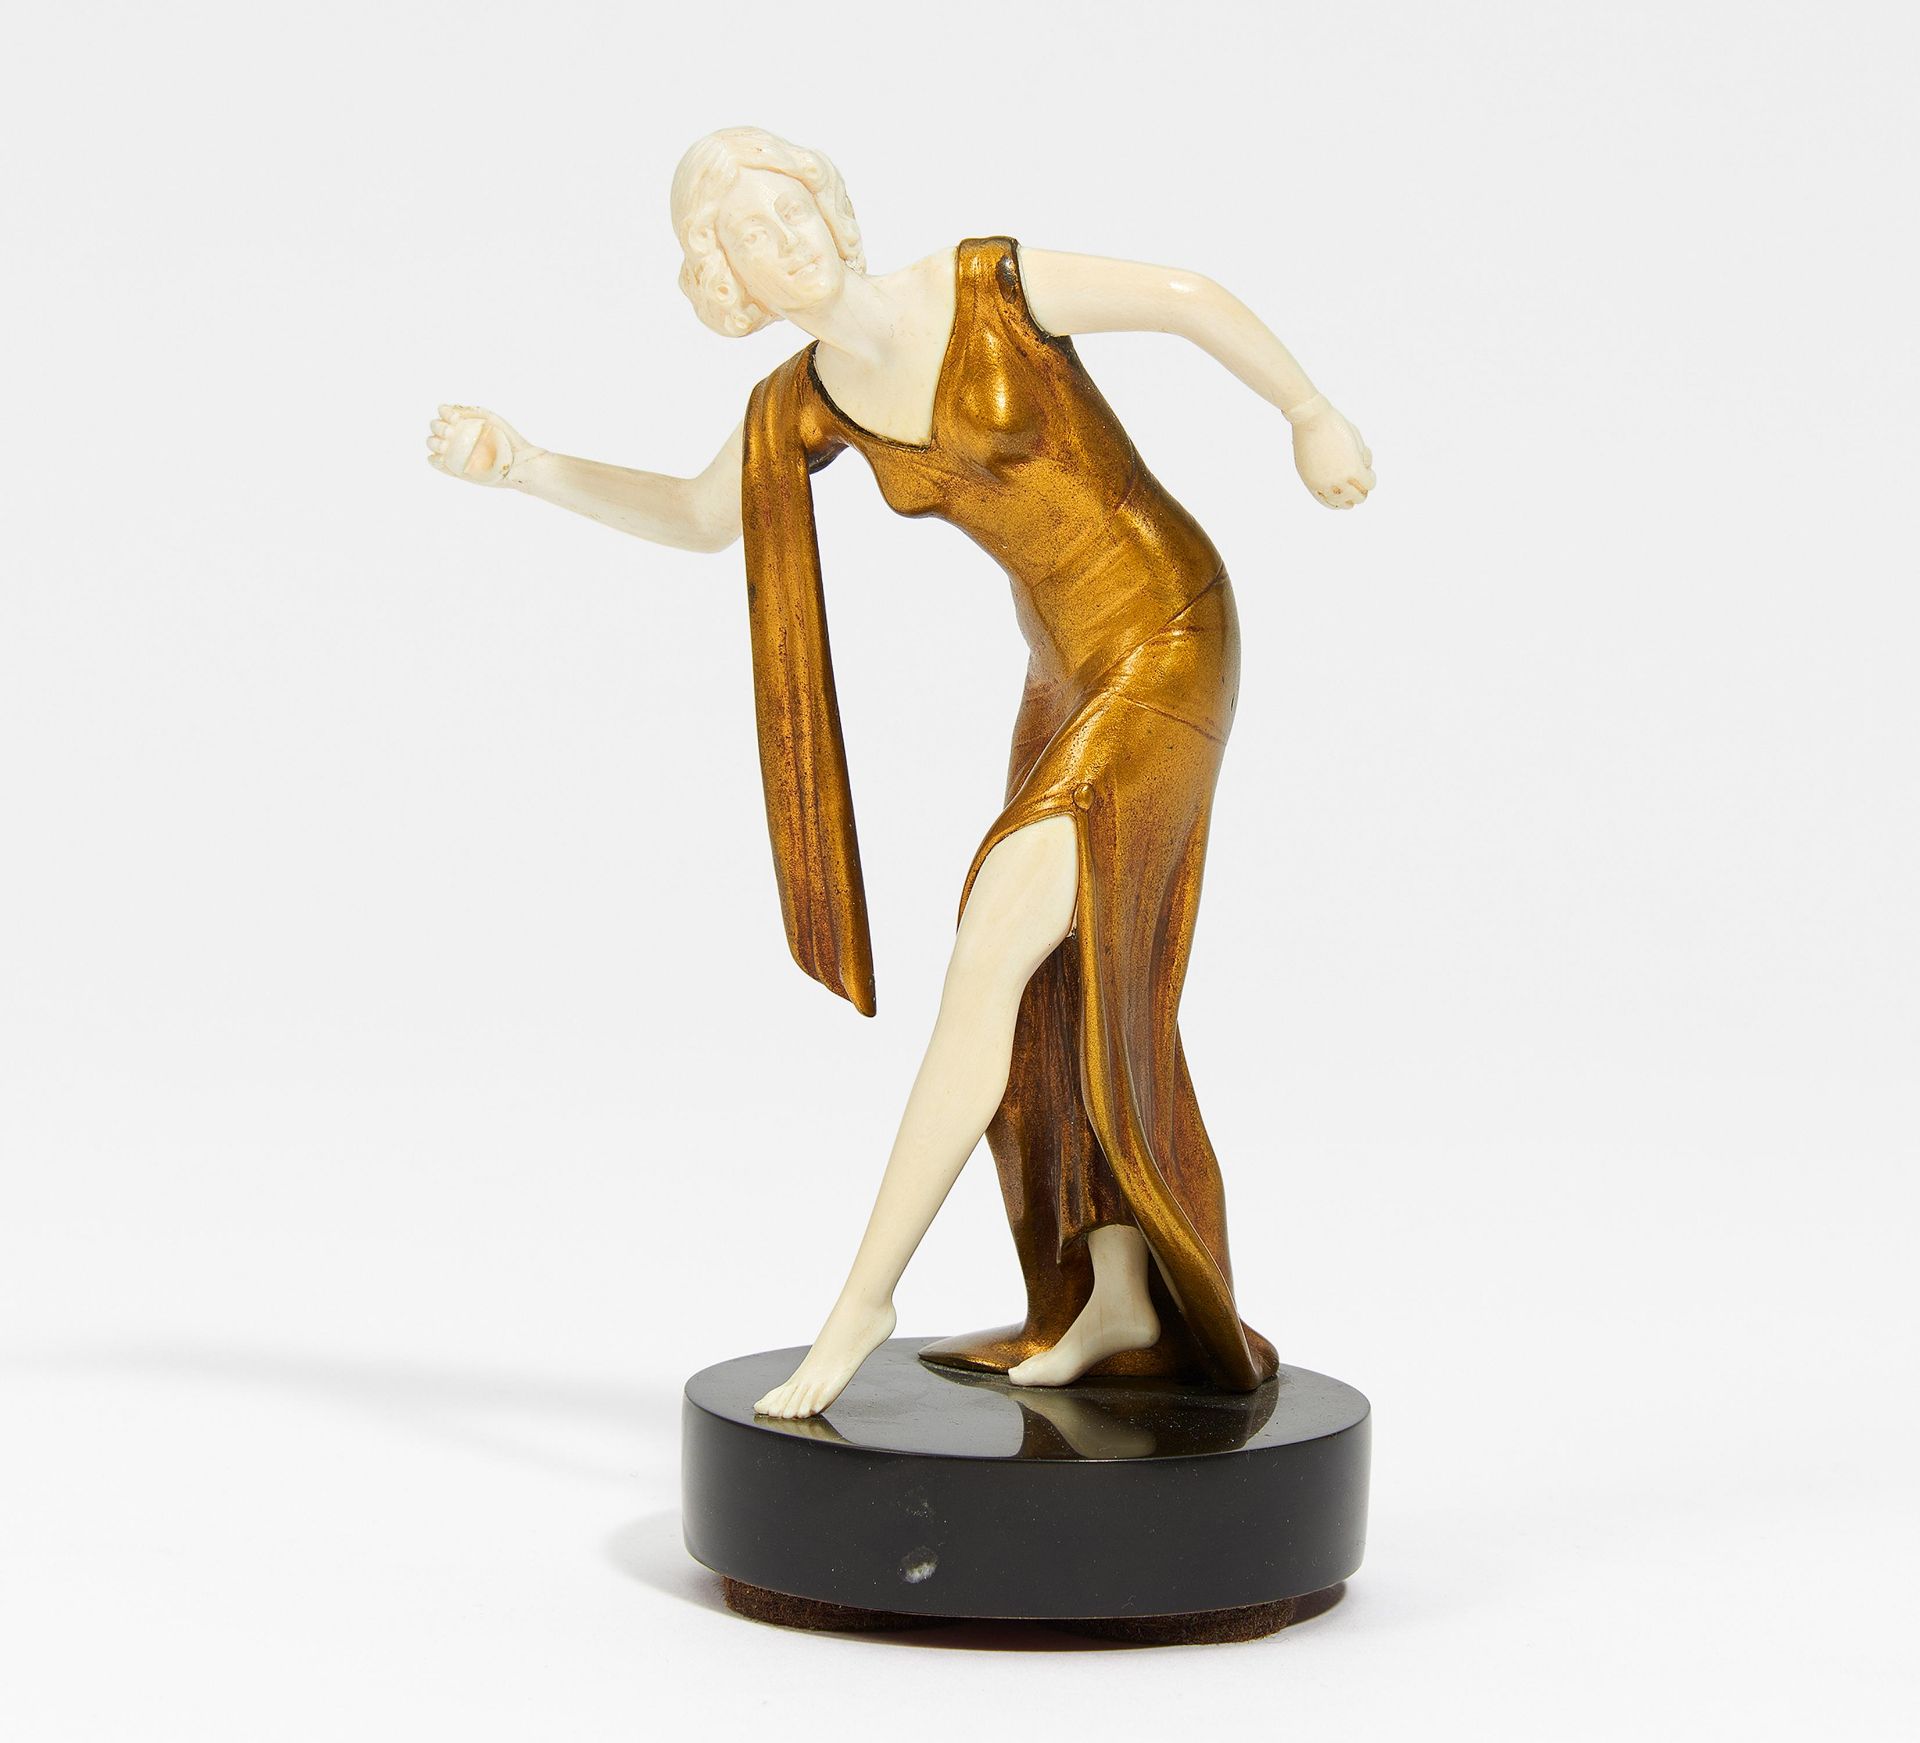 FIGURINE OF DANCING GIRL WITH CASTANETS MADE OF IVORY AND GILDED BRONZ ON STONE PEDESTAL. Ca. 1920s.